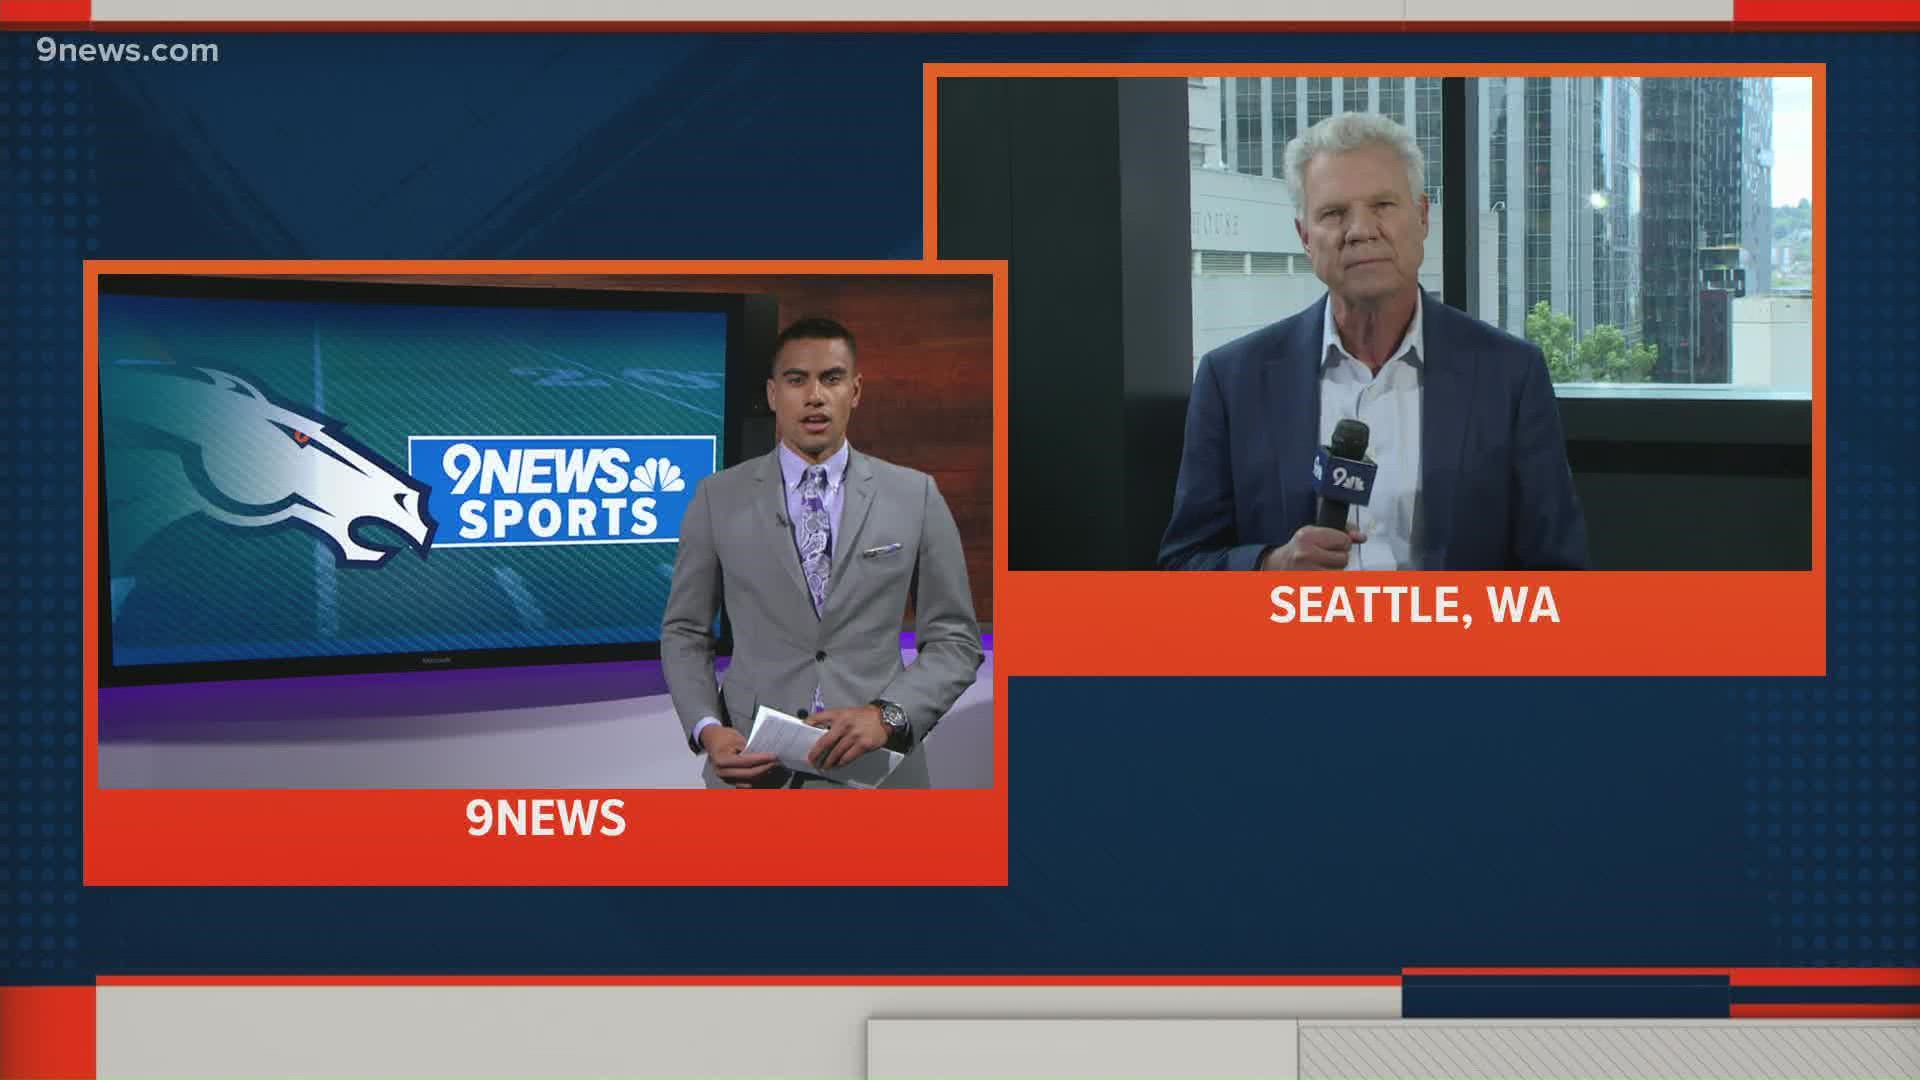 Mike Klis provides the latest updates the evening ahead of the second Denver Broncos preseason game.